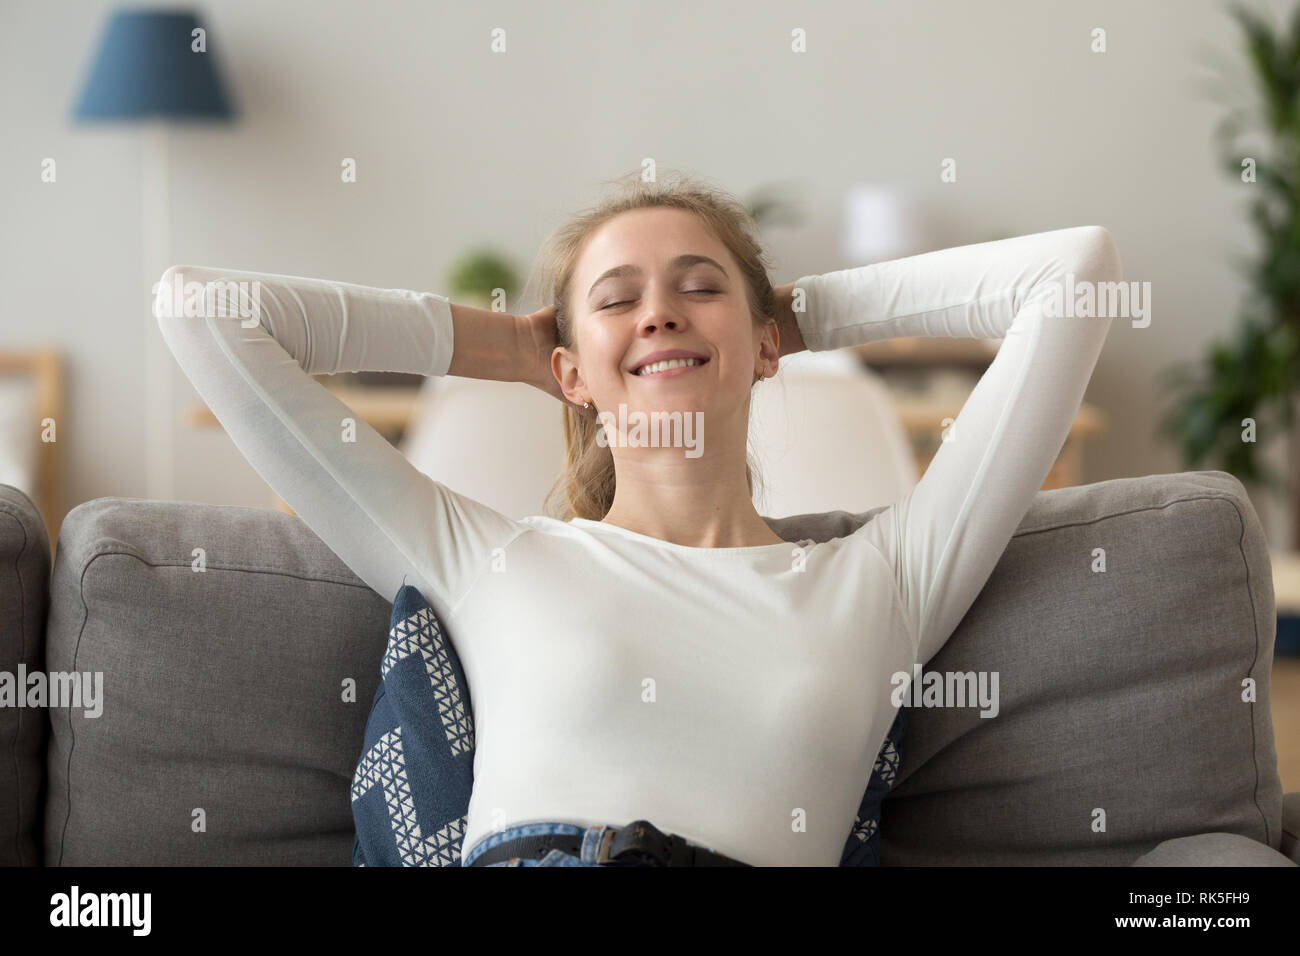 Relaxed happy woman resting on comfortable couch breathing fresh air Stock Photo